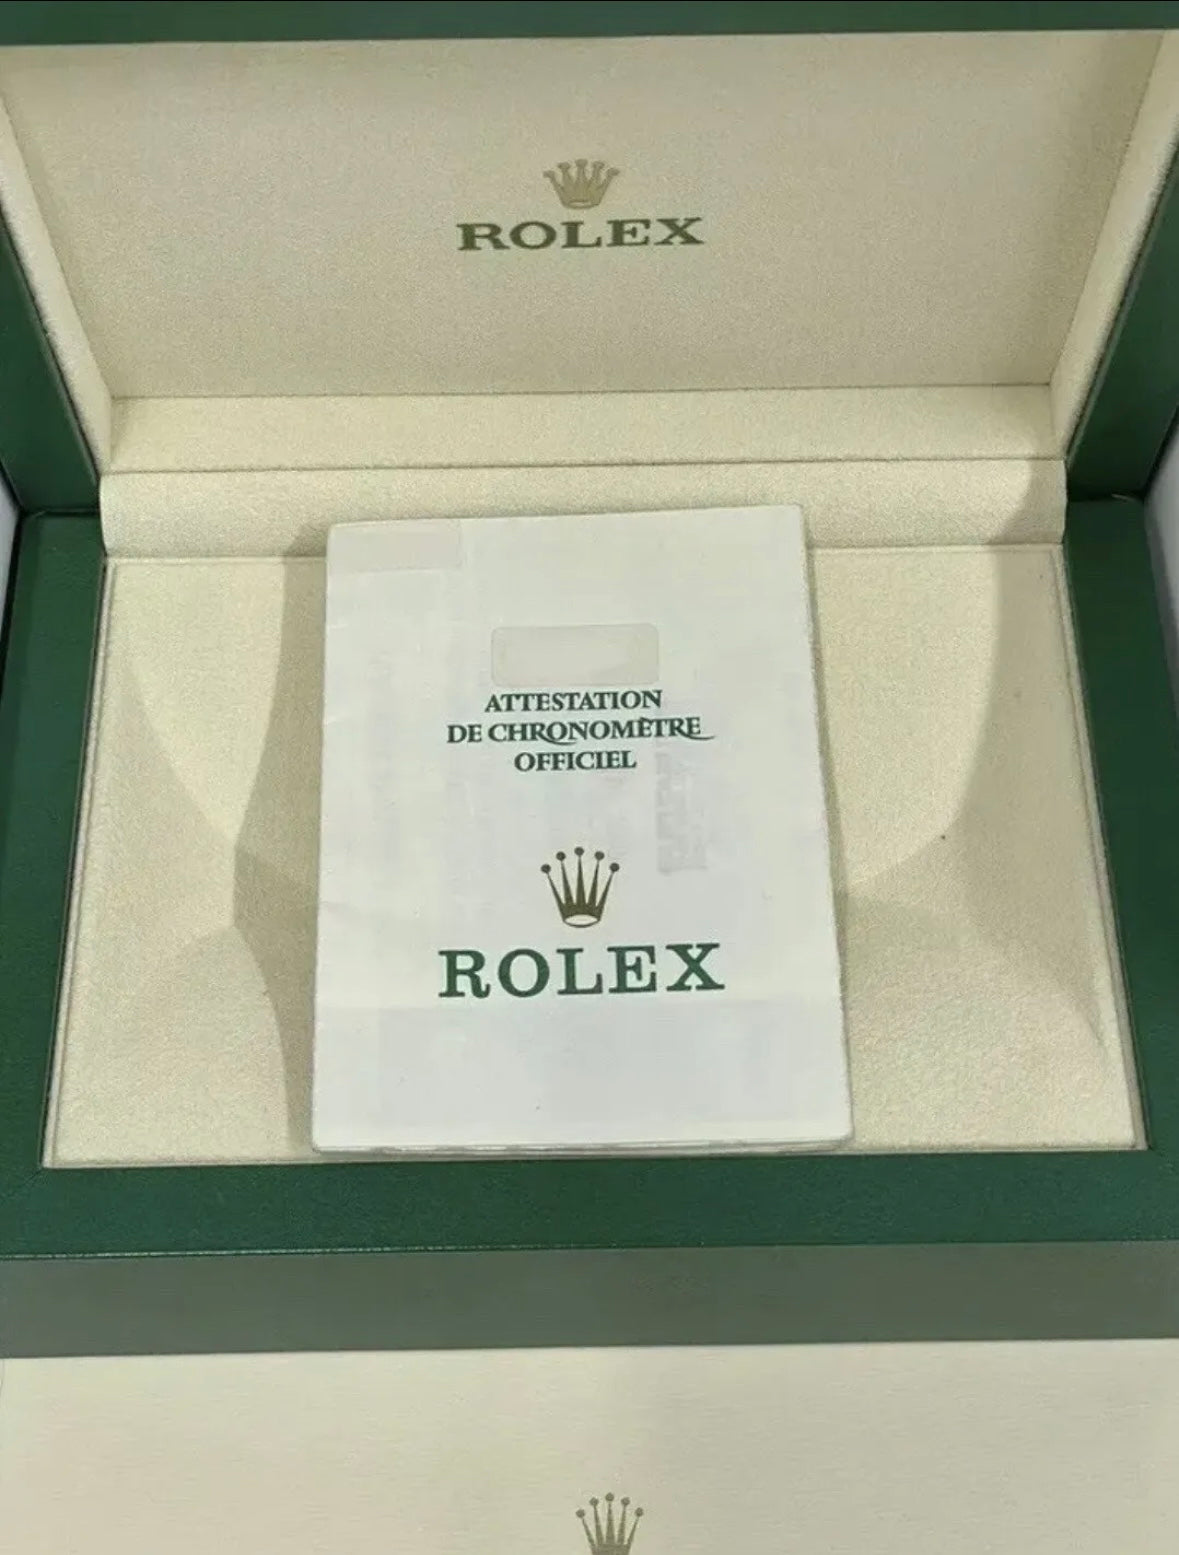 Rolex Ladies Datejust 26mm Factory Champagne Diamond Dial ‘69173’ - Ride On Timee